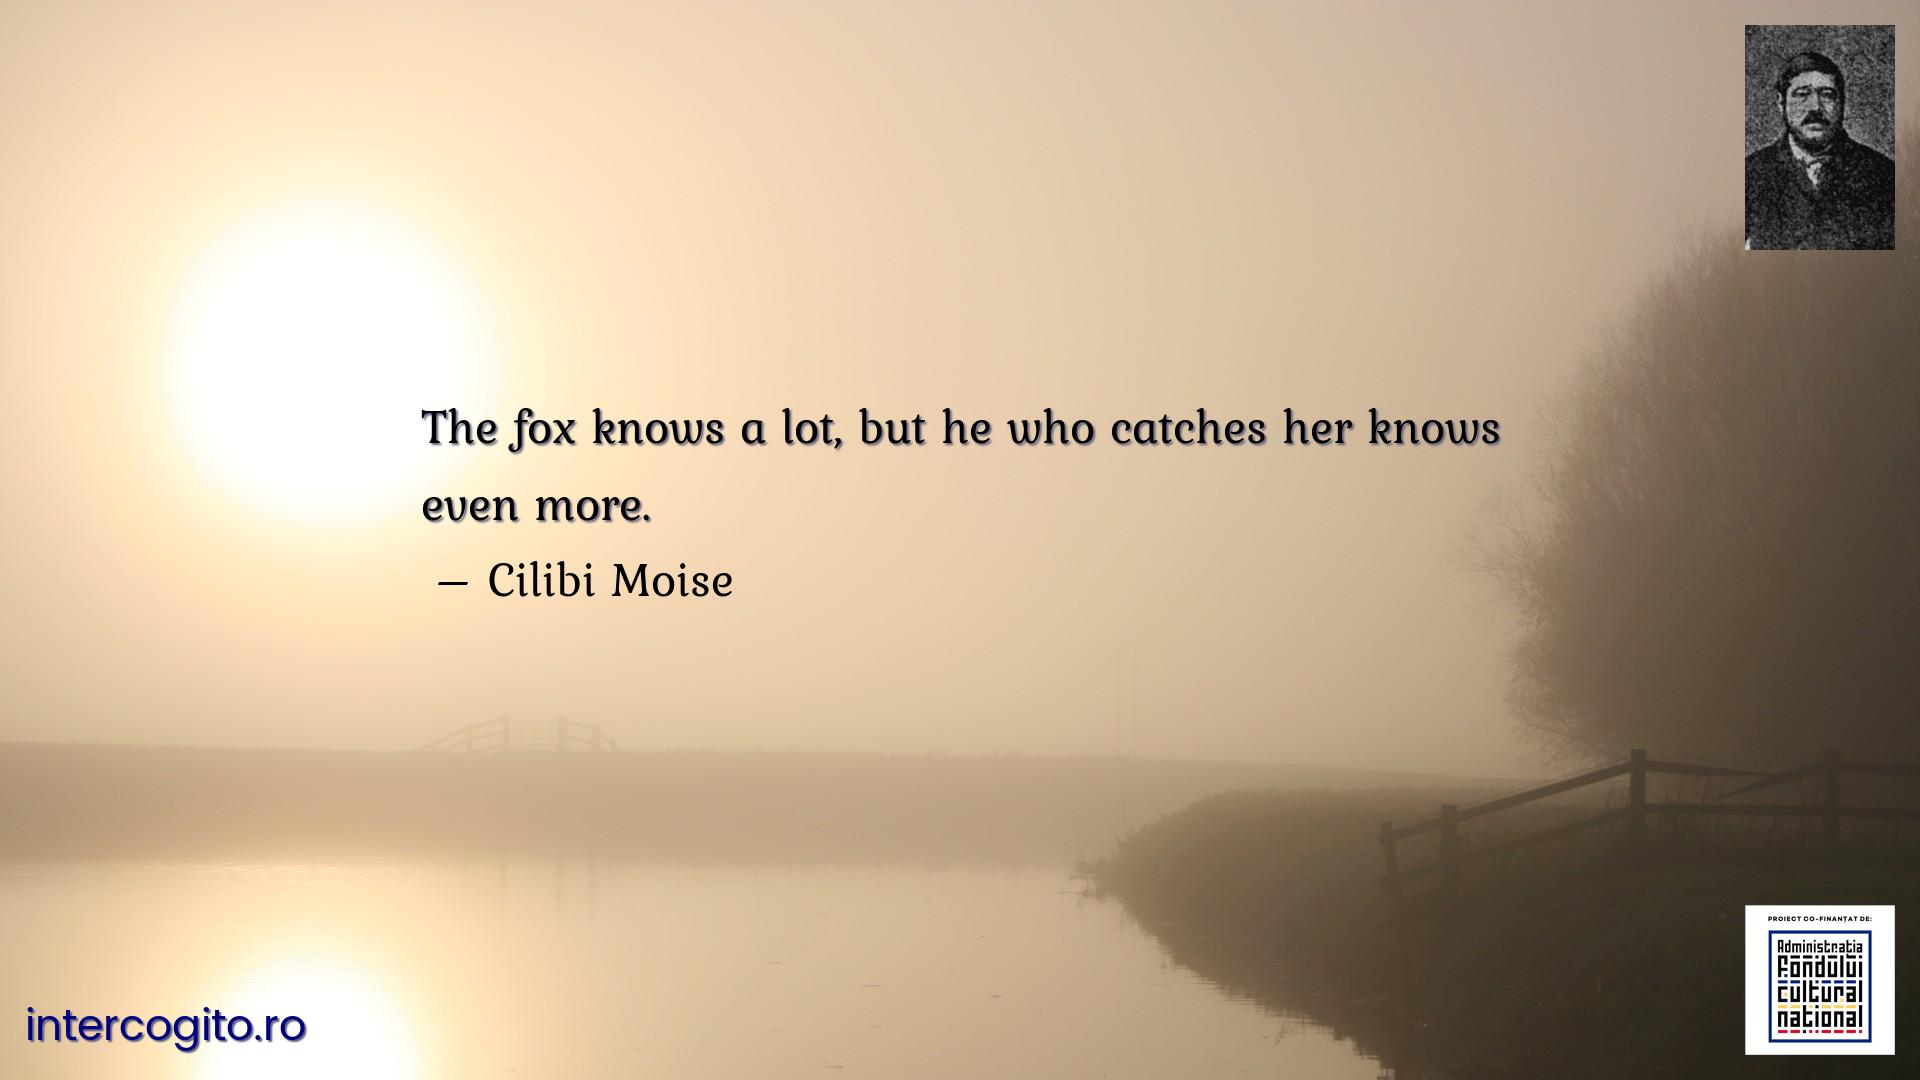 The fox knows a lot, but he who catches her knows even more.